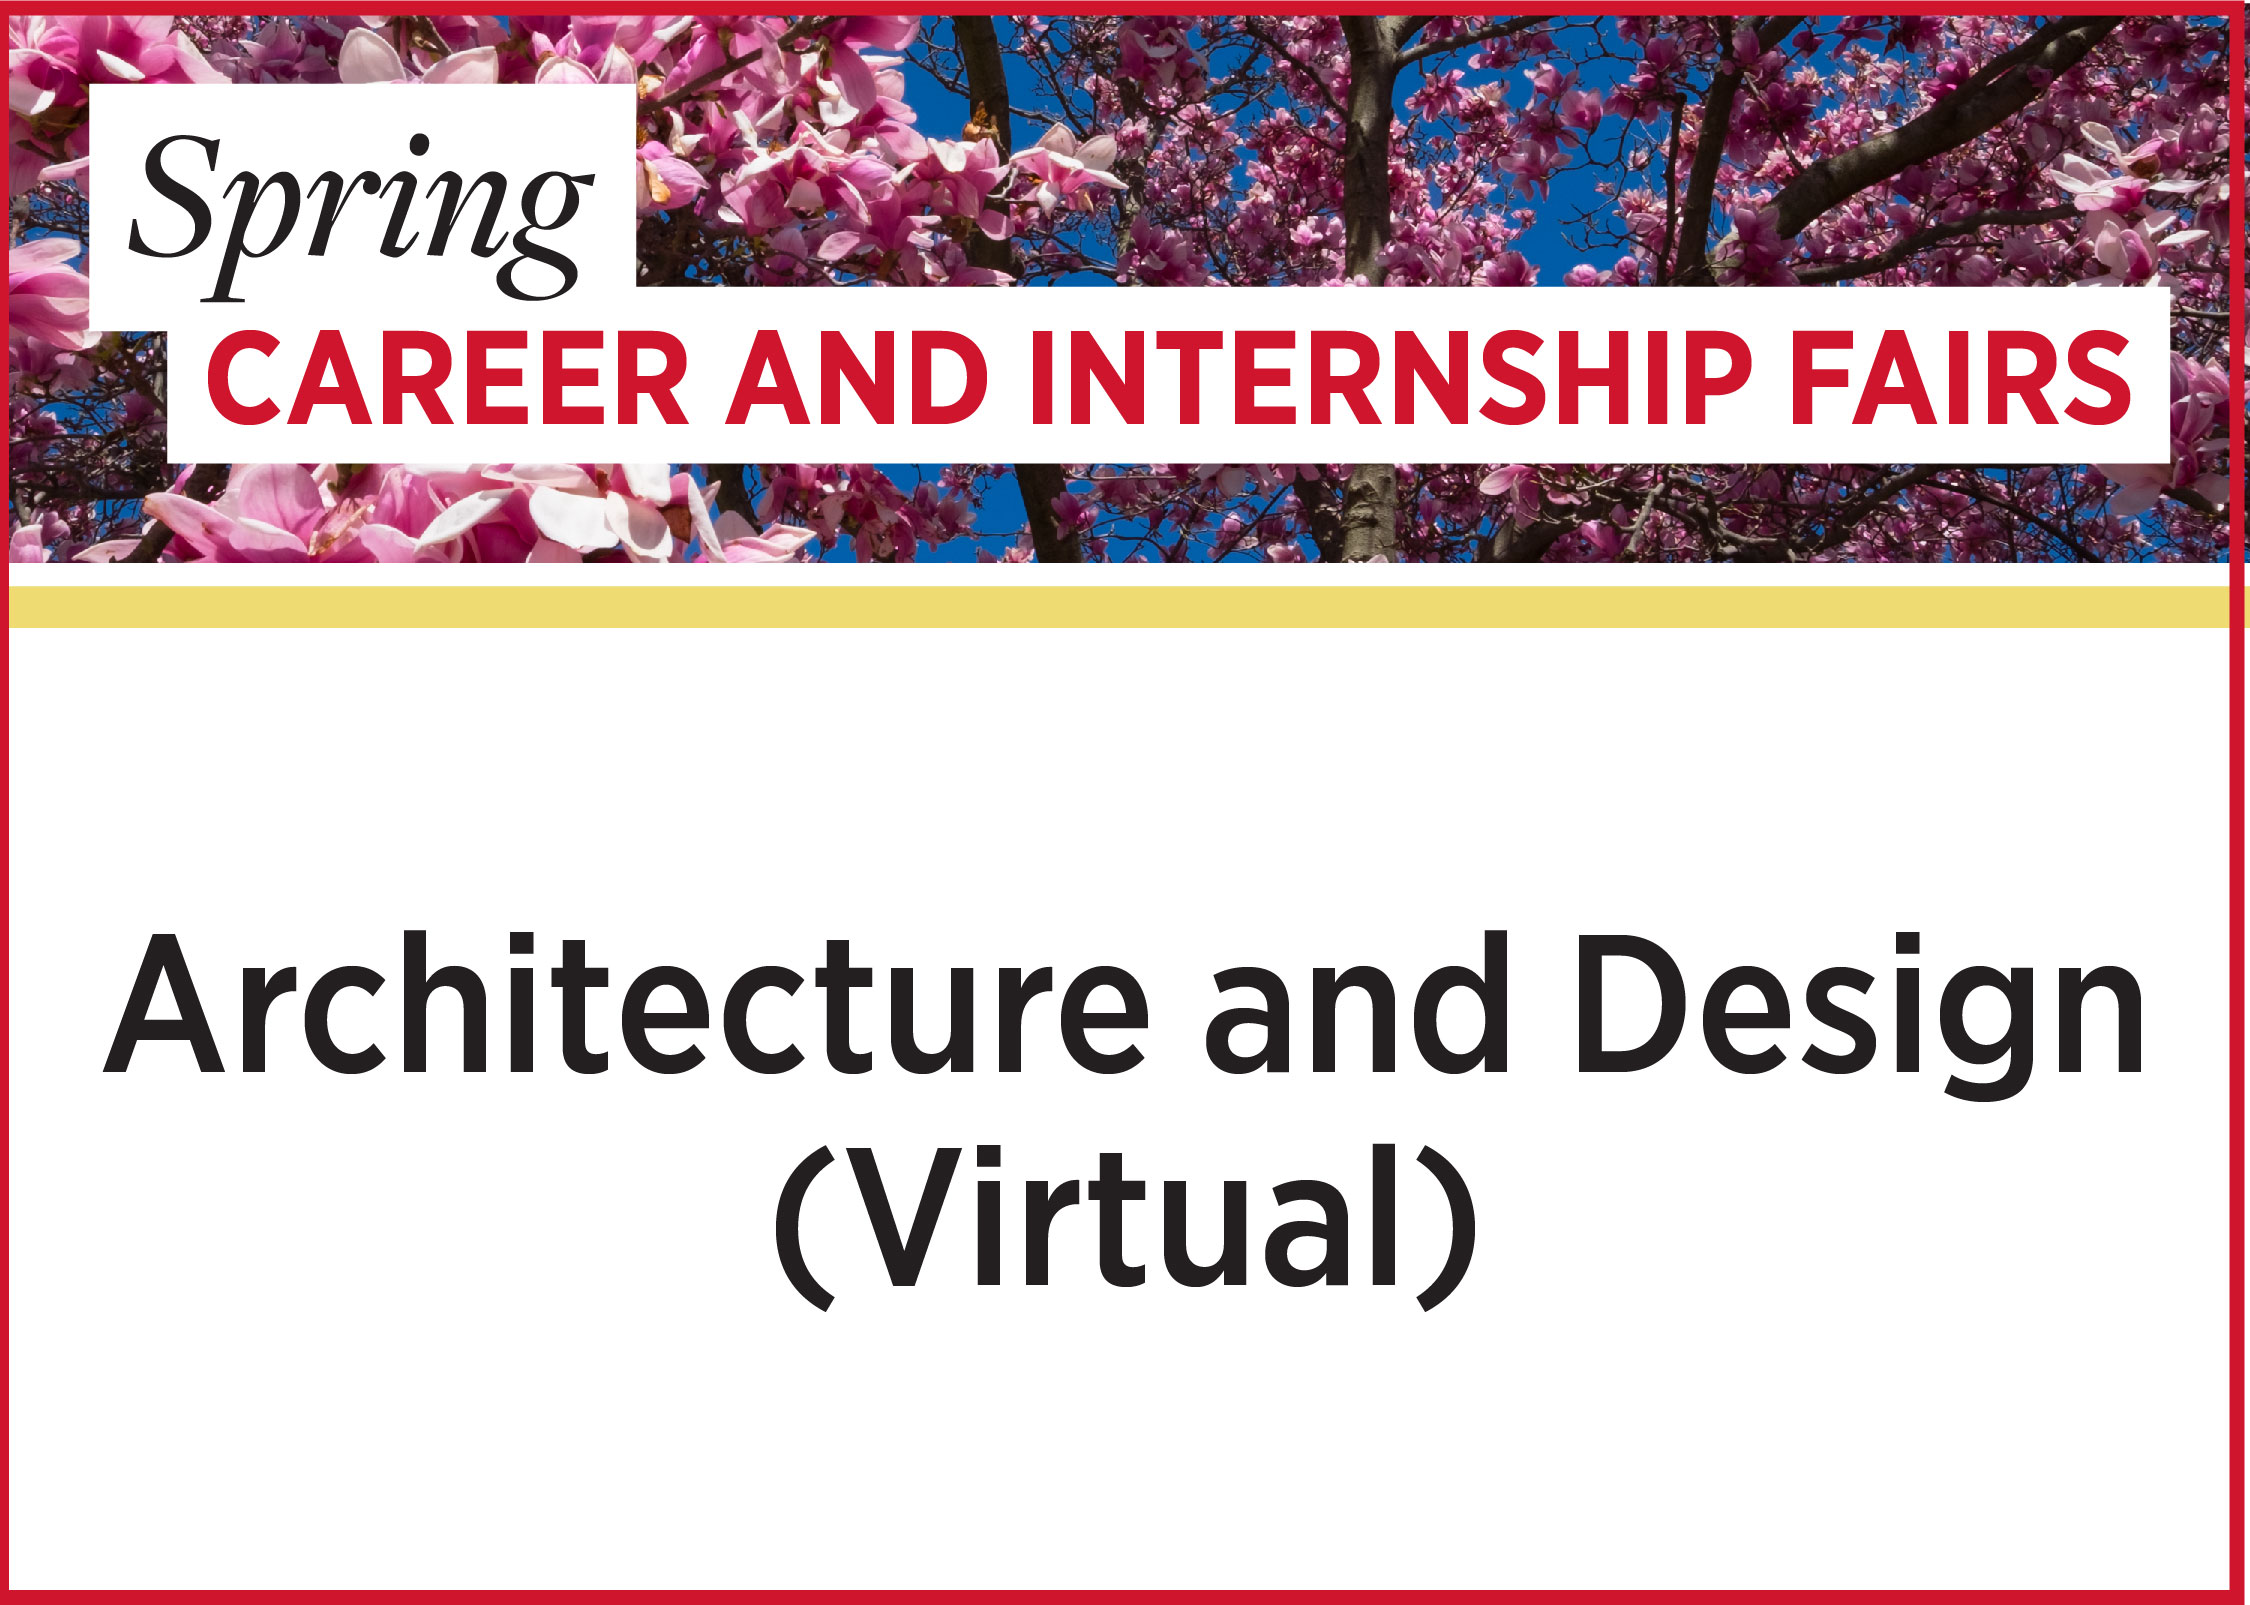 Spring Career and Internship Fairs - Architecture and Design (Virtual)